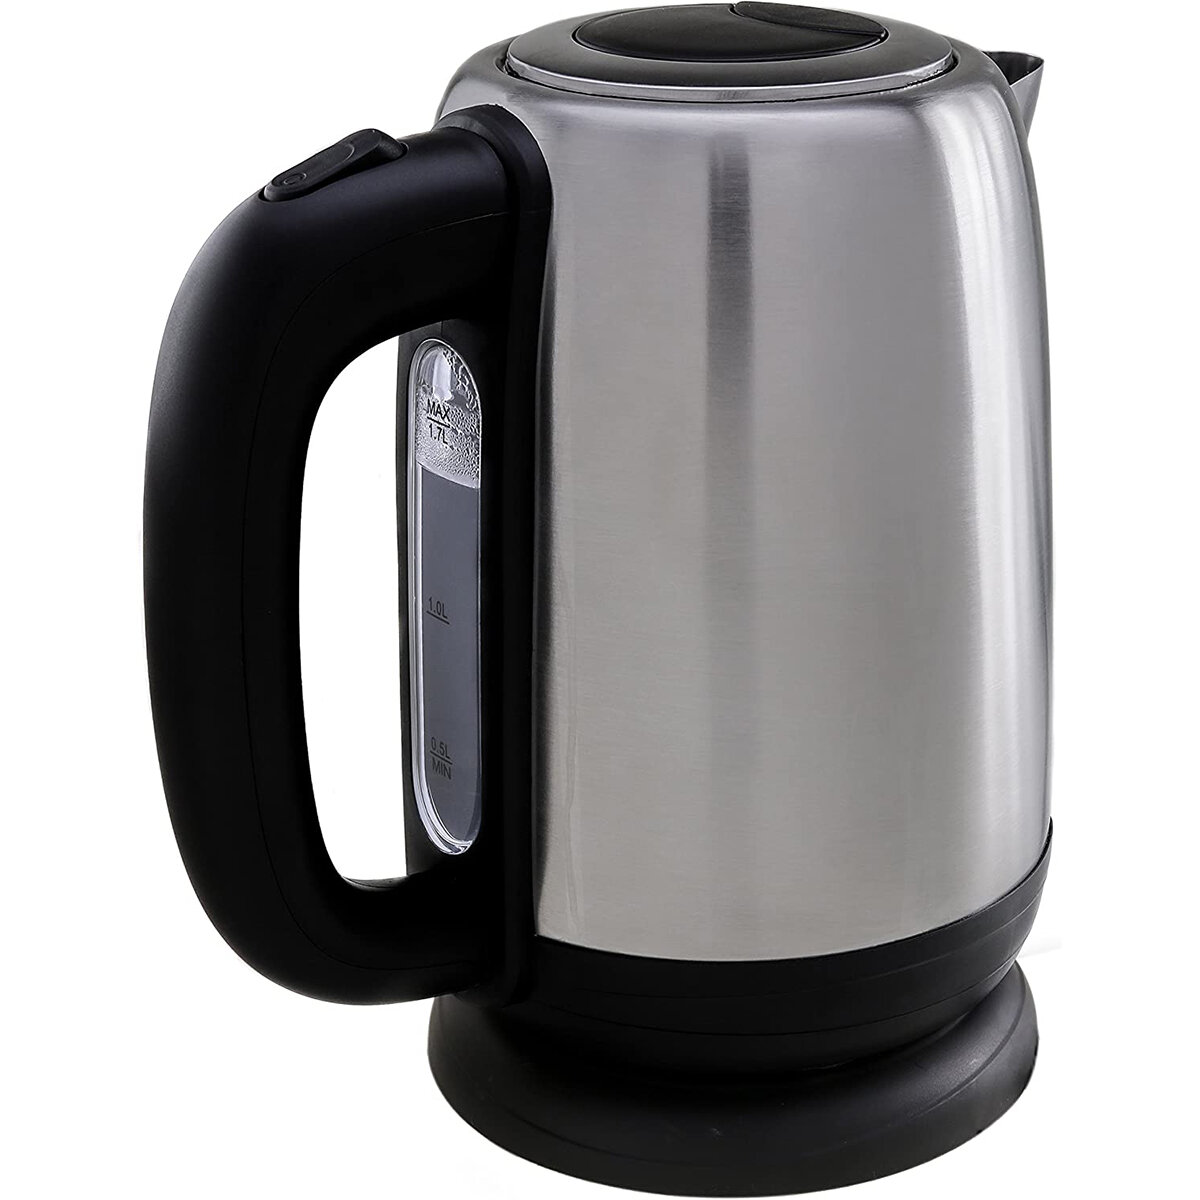 Ovente Electric Hot Water Kettle Boiler 1.7 Liter Stainless Steel